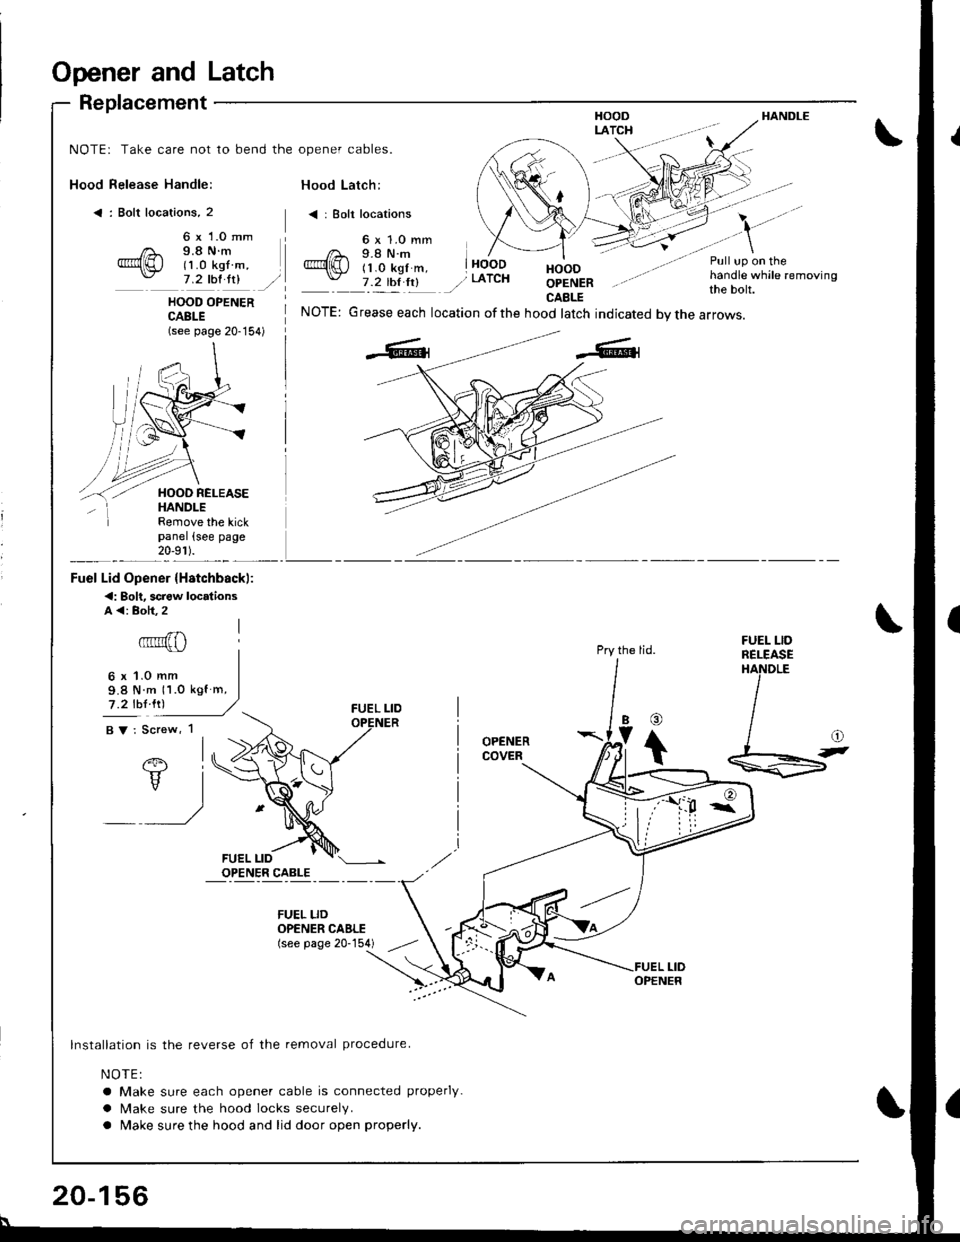 HONDA INTEGRA 1998 4.G User Guide Opener and Latch
Replacement
Hood Release Handle:
< : Bolt locations, 2
HANDLE
NOTE: Take care not to bend the opener cables.
Hood Latch:
< | Bolt locations
6 x 1.0 mm9.8 N.m(1 .0 kgf m,7 .2 thl ltlHO